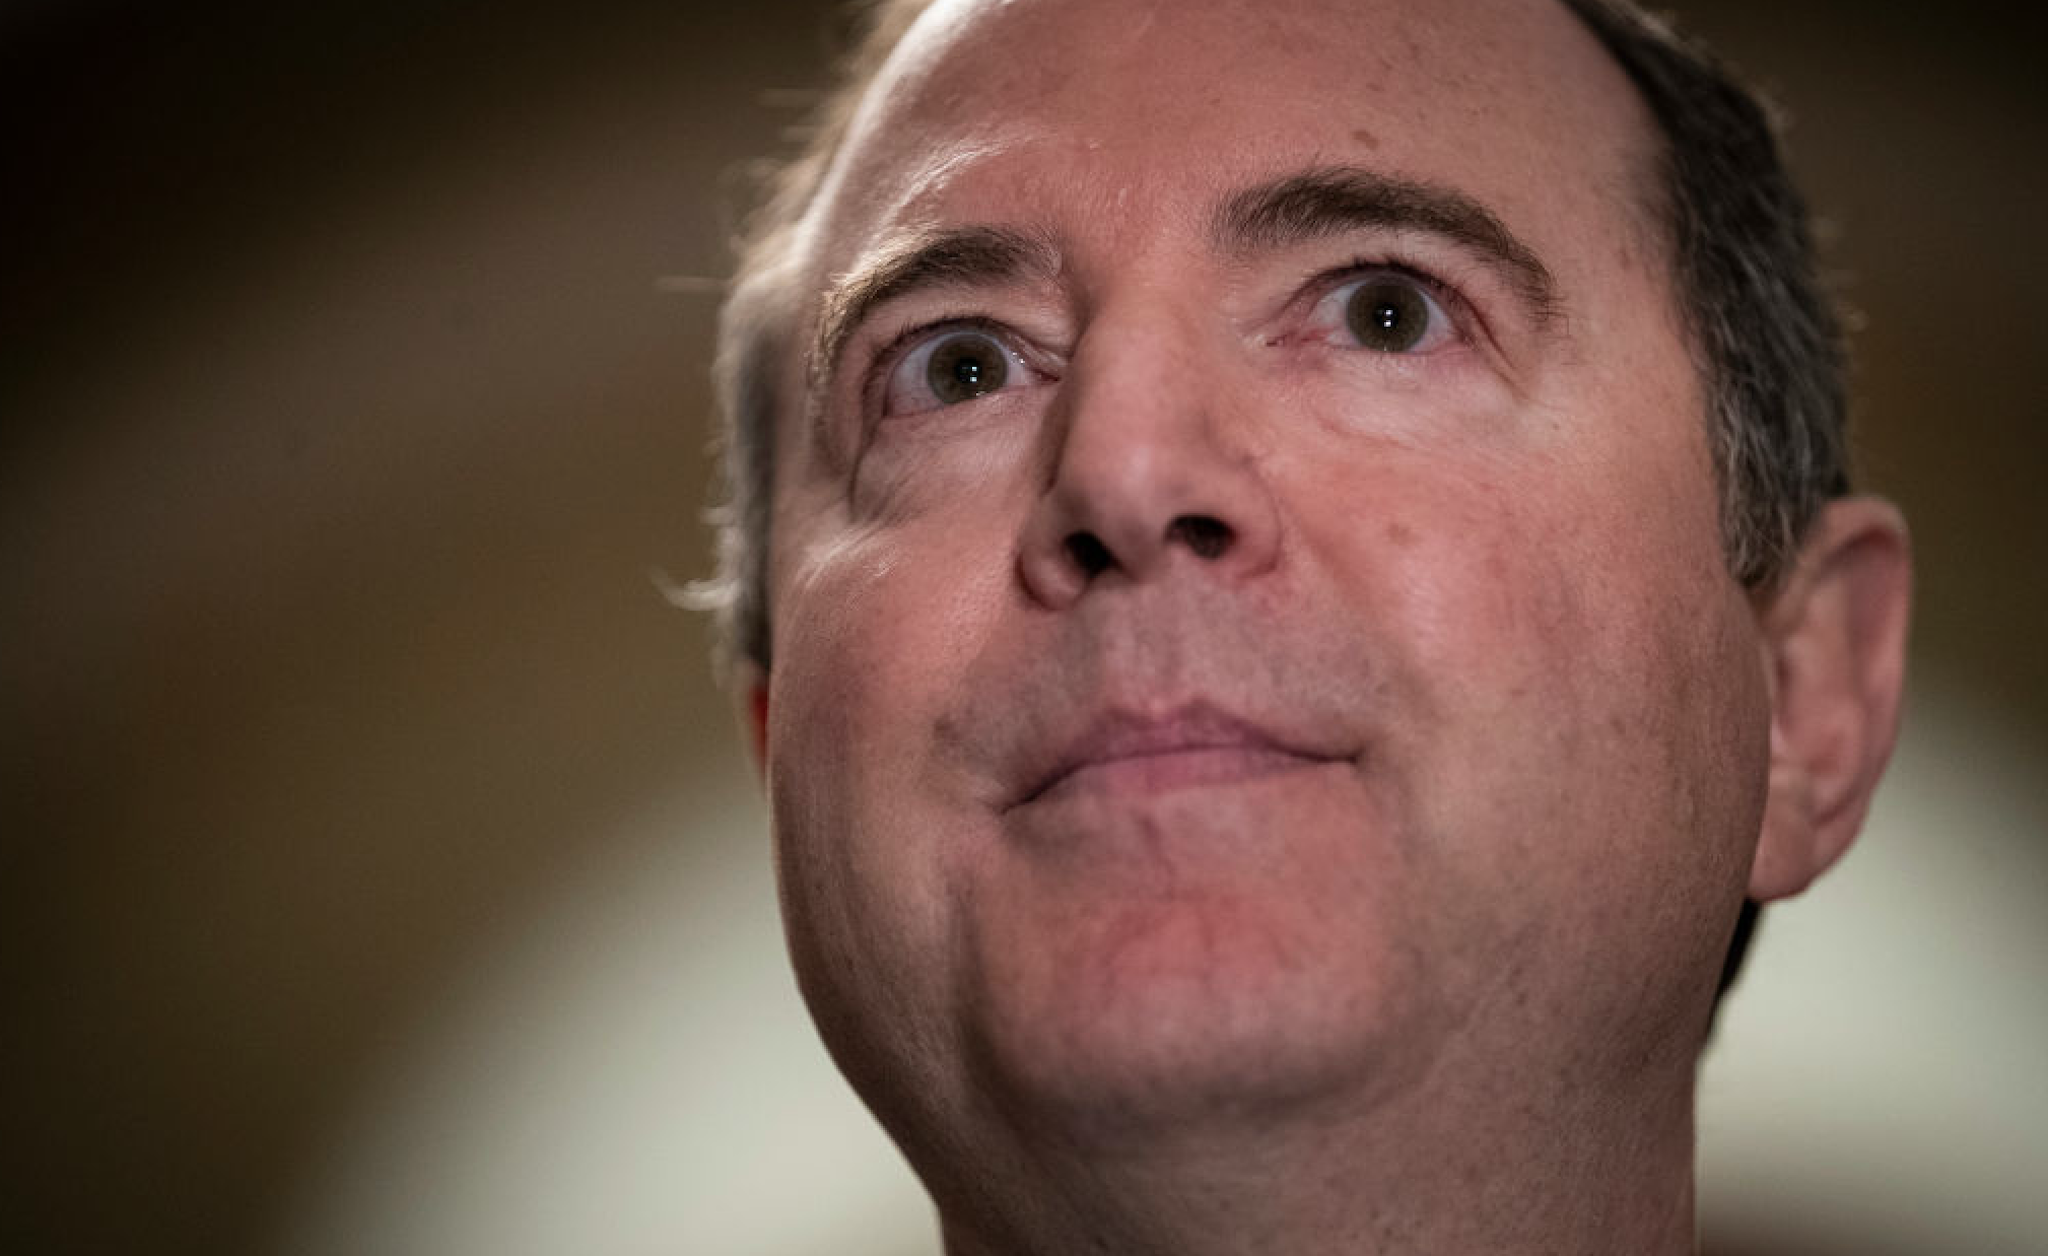 House impeachment manager Rep. Adam Schiff (D-CA) speaks to reporters during a brief media availability before the start of the impeachment trial at the U.S. Capitol on January 21, 2020 in Washington, DC.